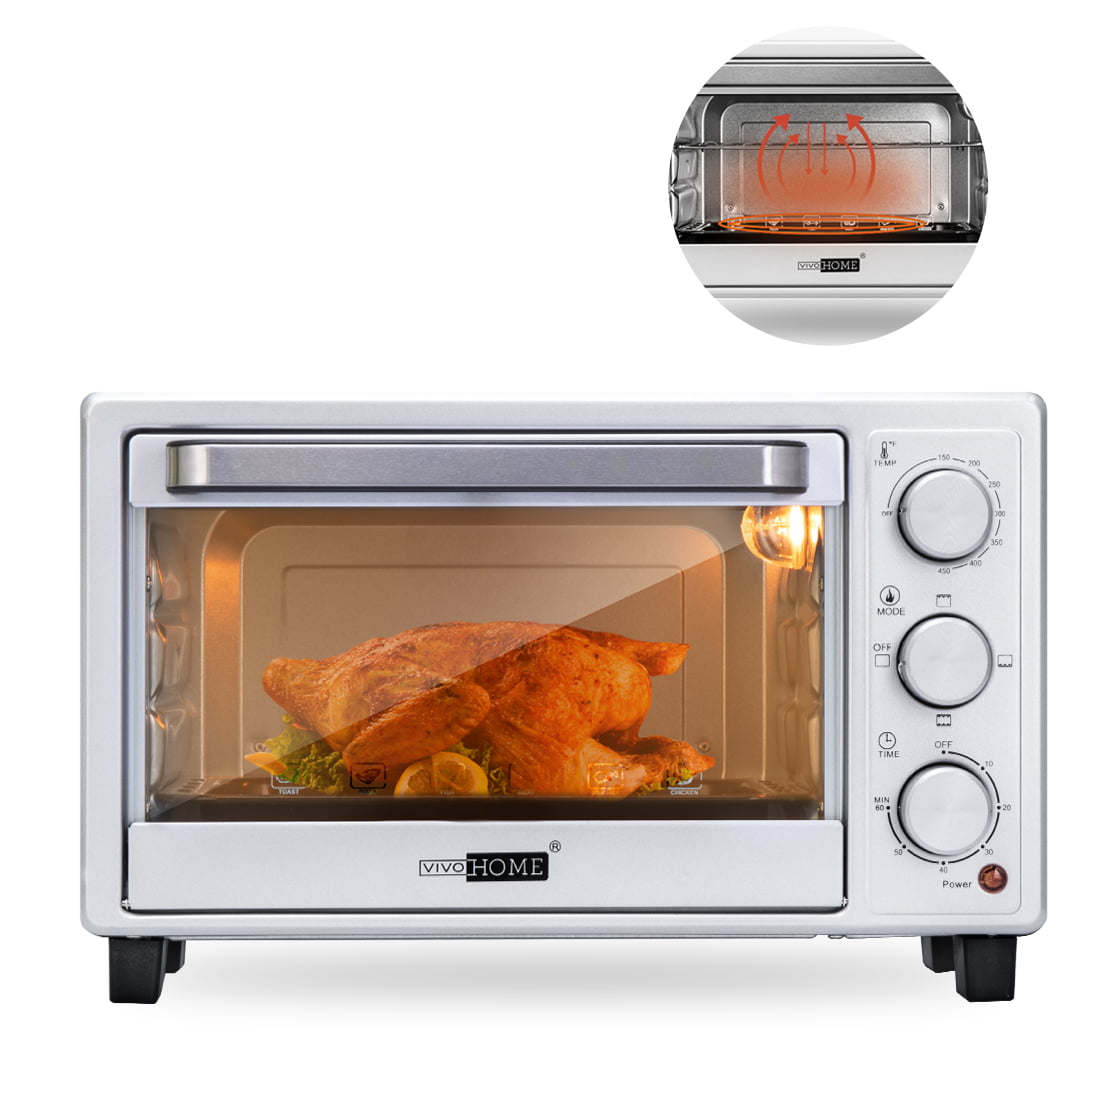 Cuisinart Custom Classic Toaster Oven Broiler 6 Slices Brushed Stainless Steel